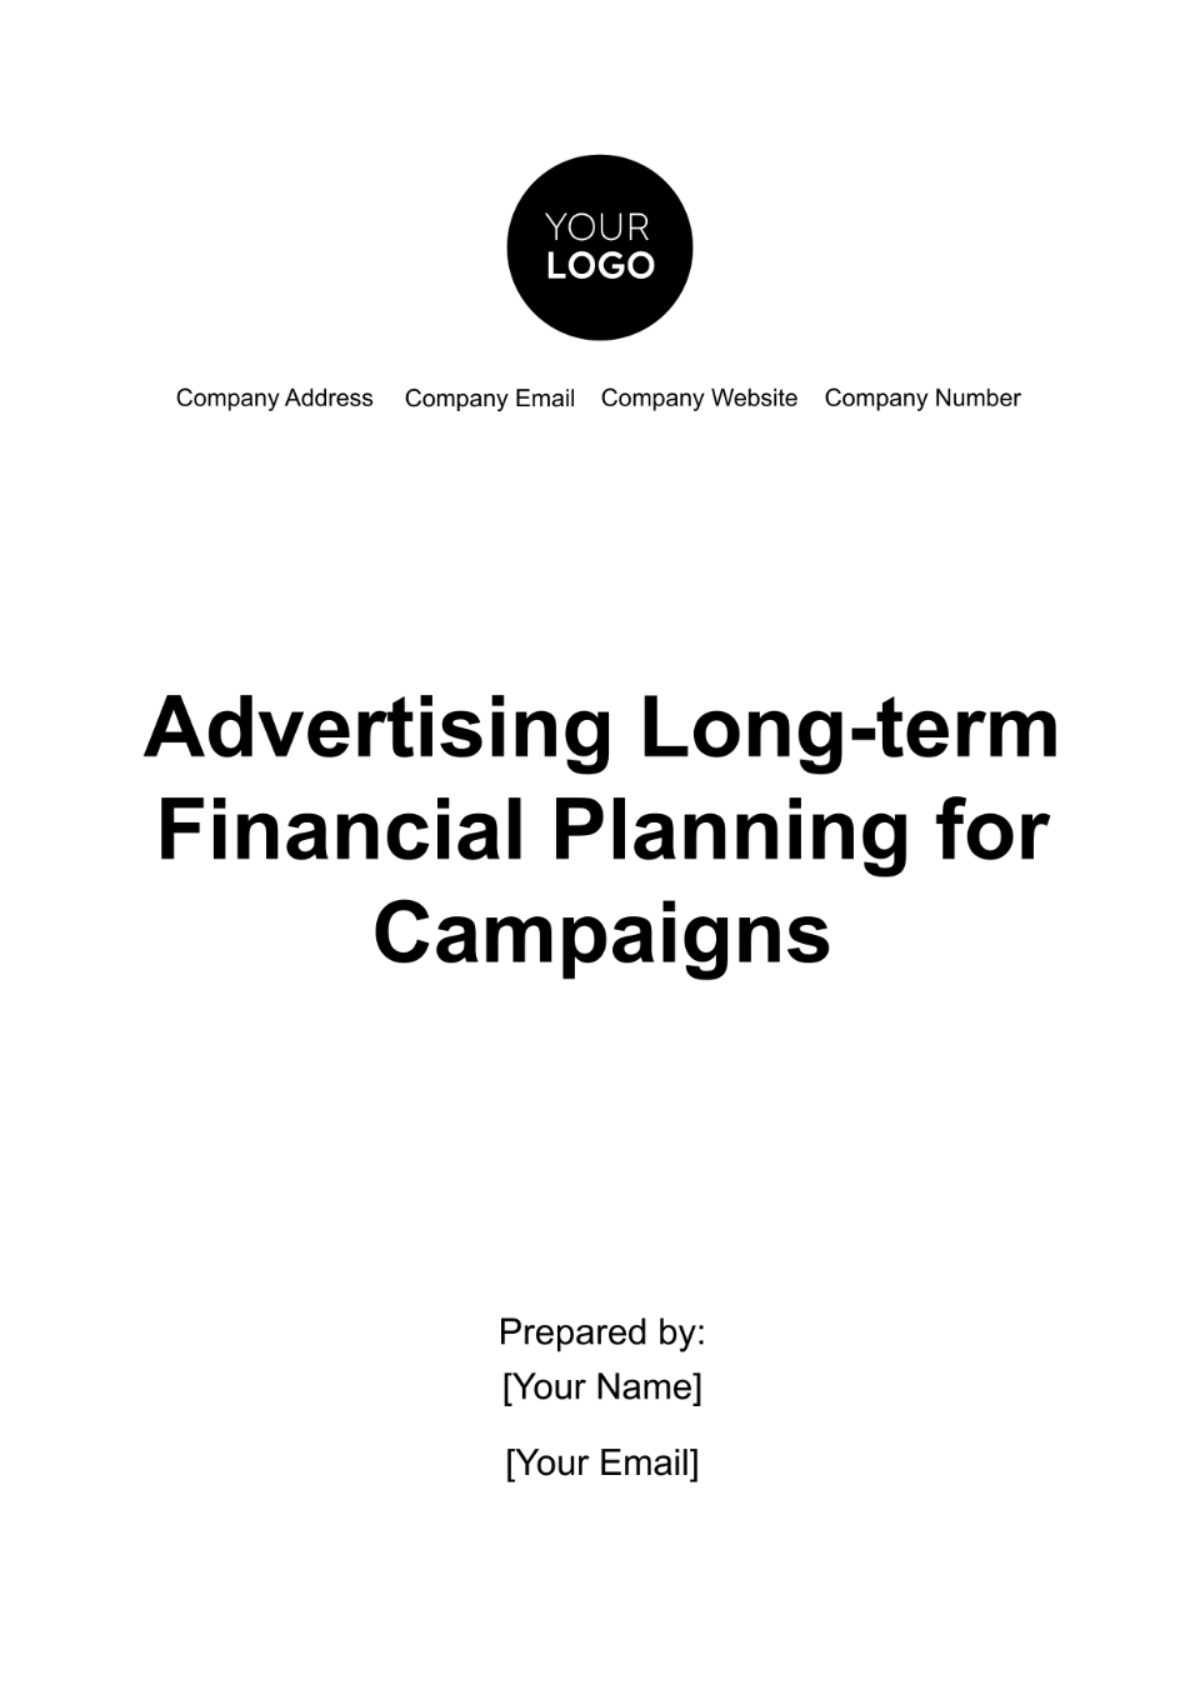 Free Advertising Long-term Financial Planning for Campaigns Template